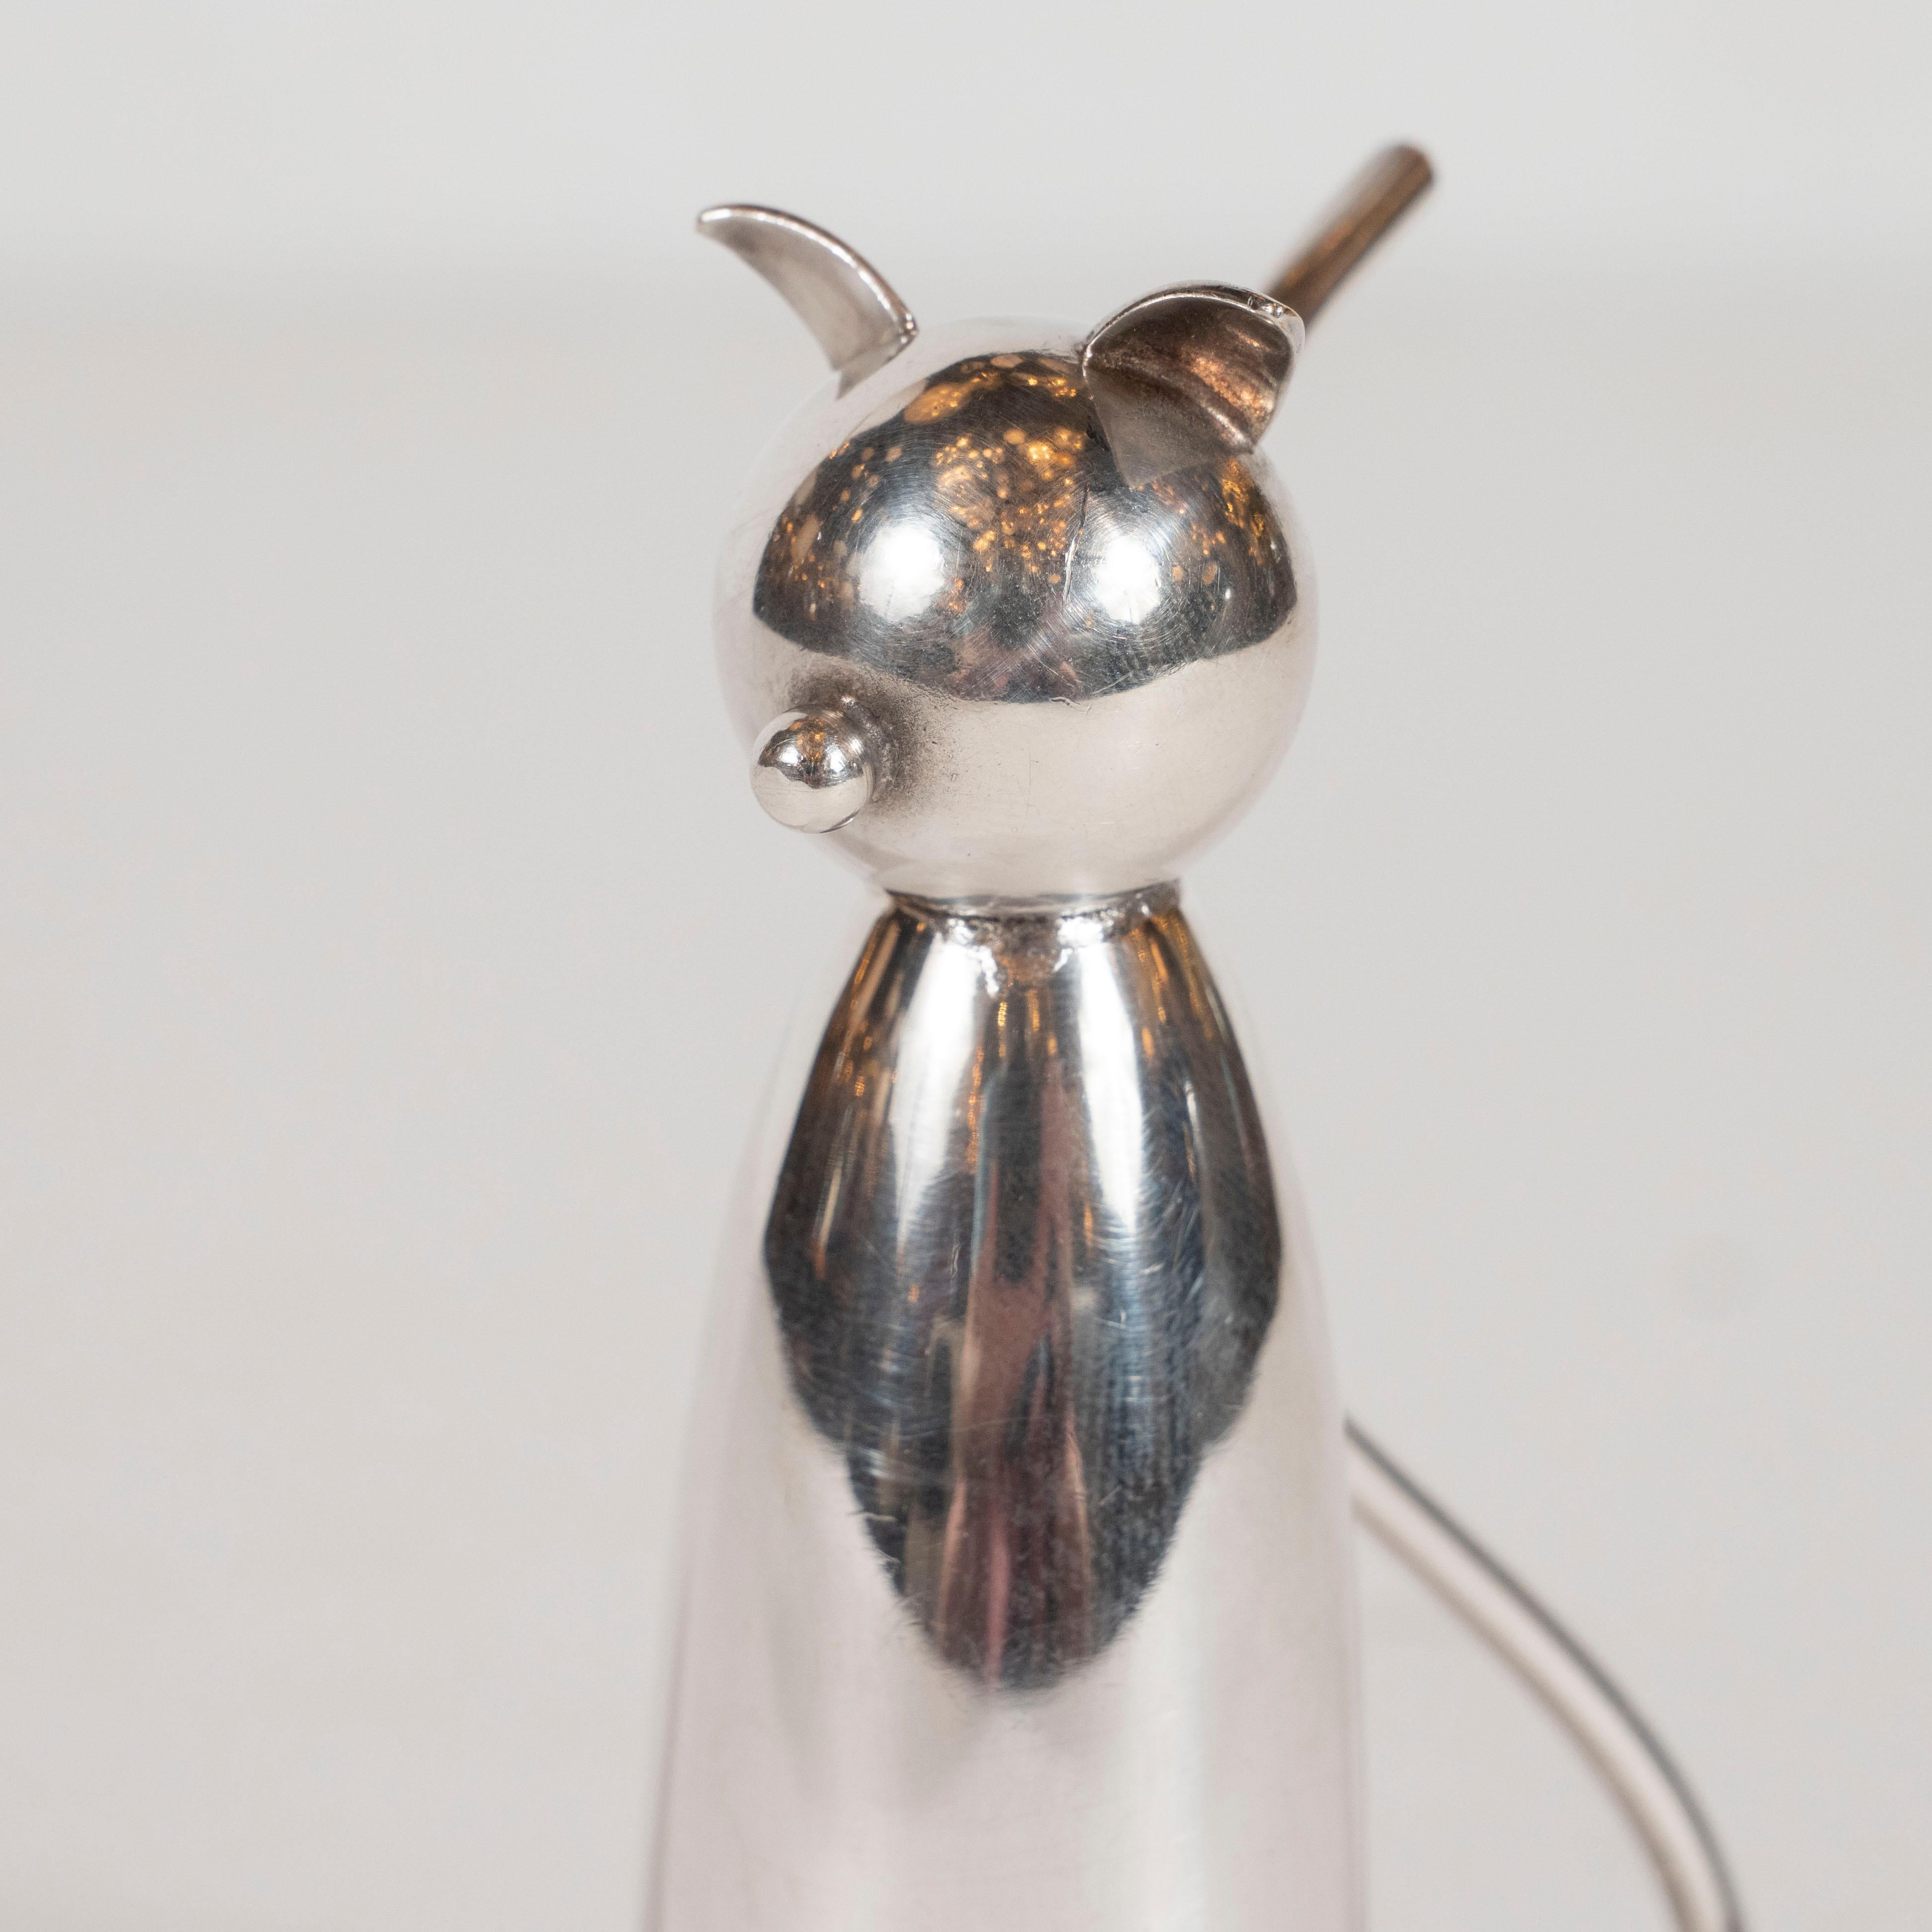 This Art Deco stylized cat jigger was realized in the United States, by the esteeemed maker Napier, circa 1940. It offer an abstracted cat form replete with an undulating tail, a button nose and streamlined ears all in silver plate. In order to use